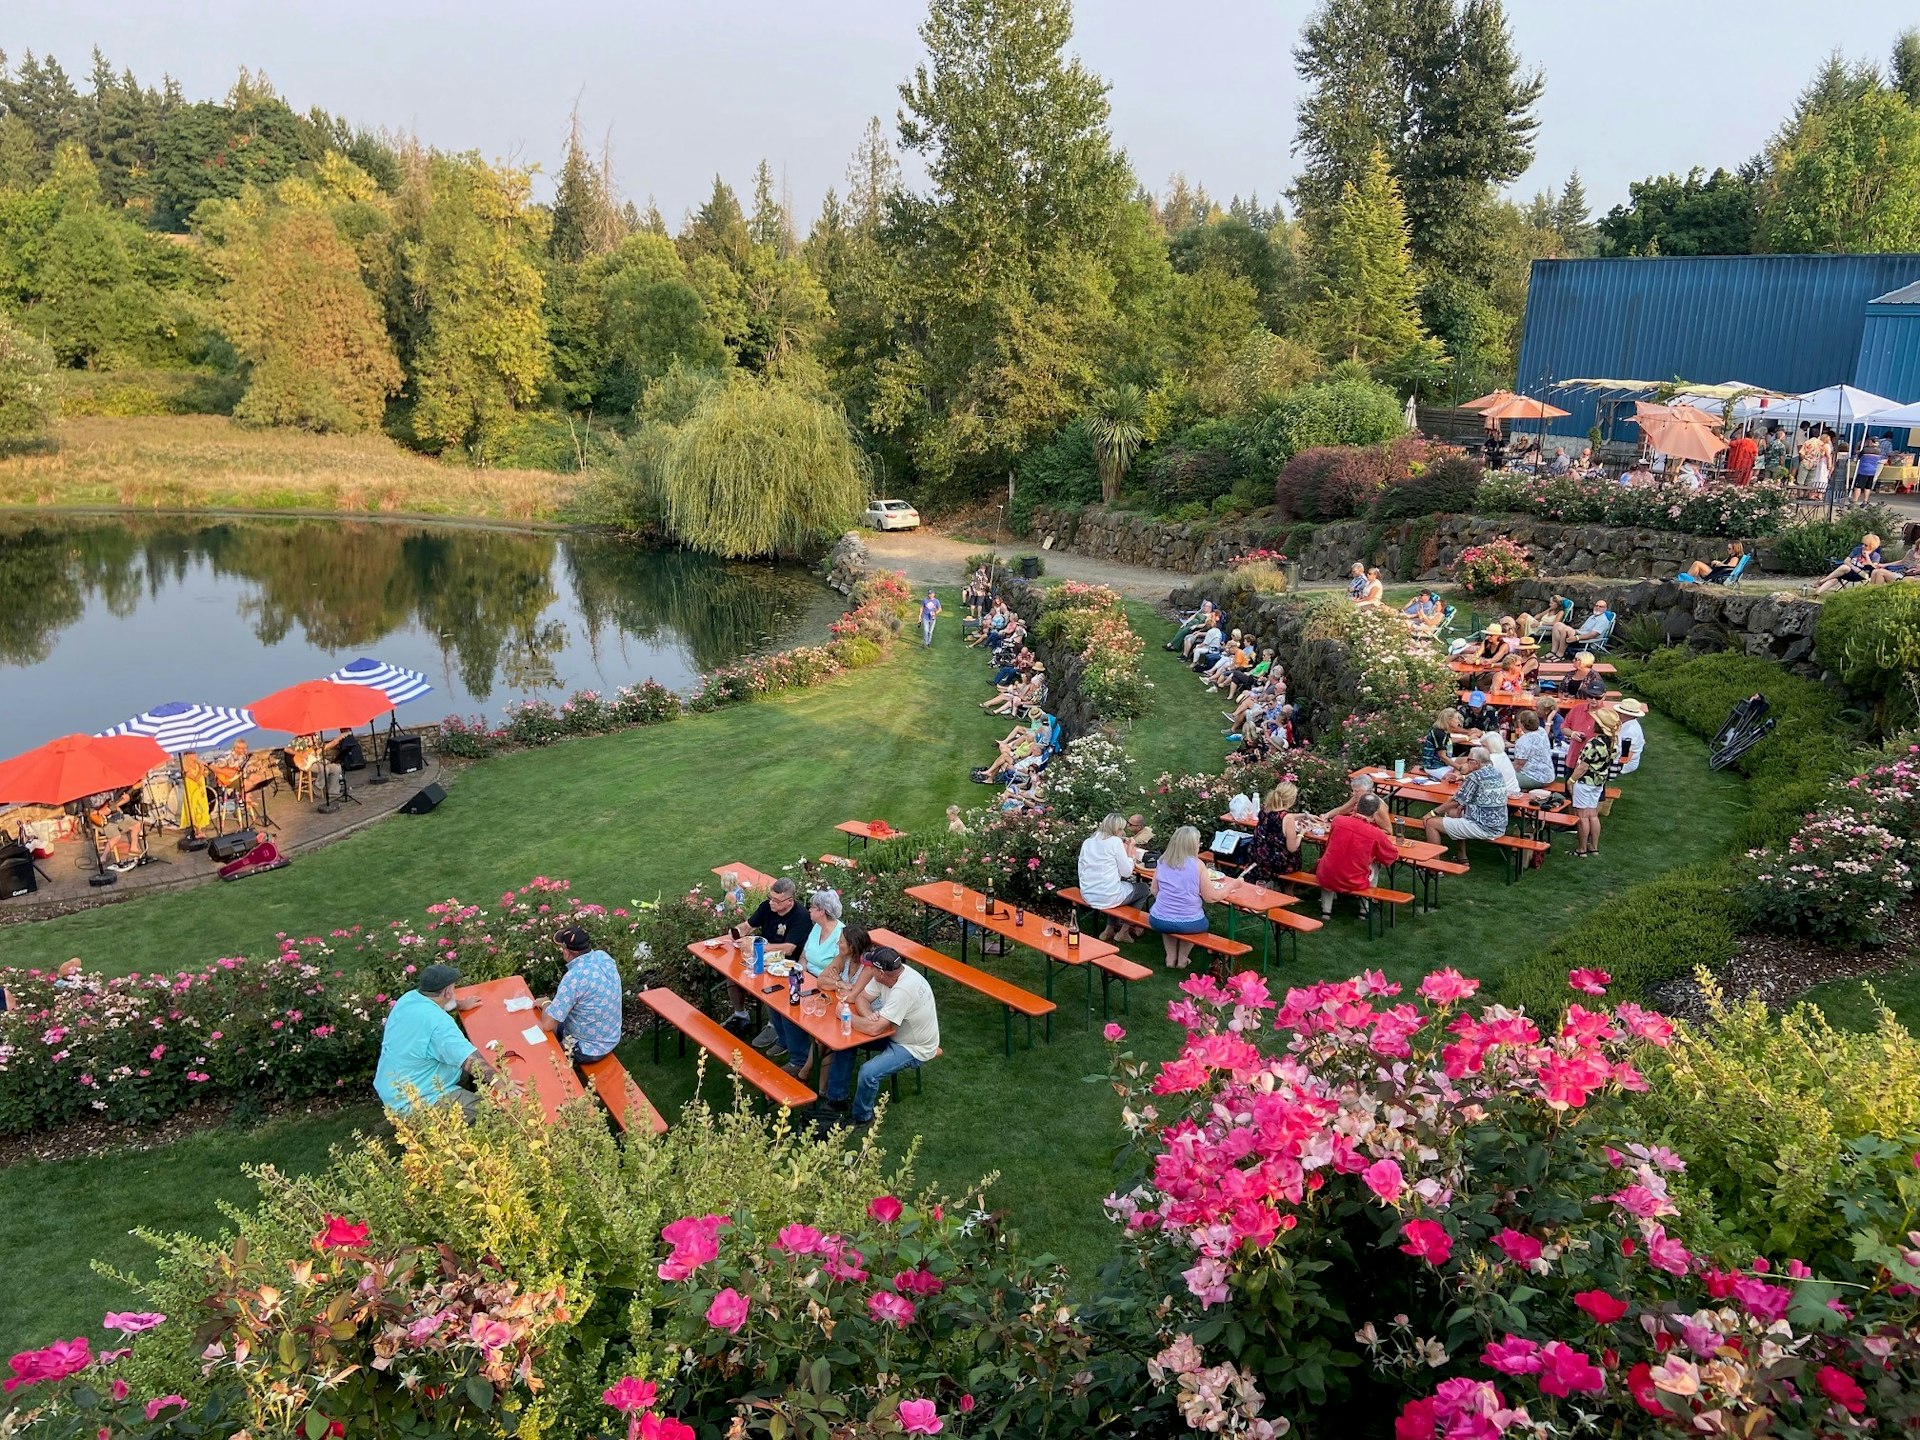 Musicians and patrons sit outdoors at St Josef’s Winery, Canby, Willamette Valley, Oregon, USA